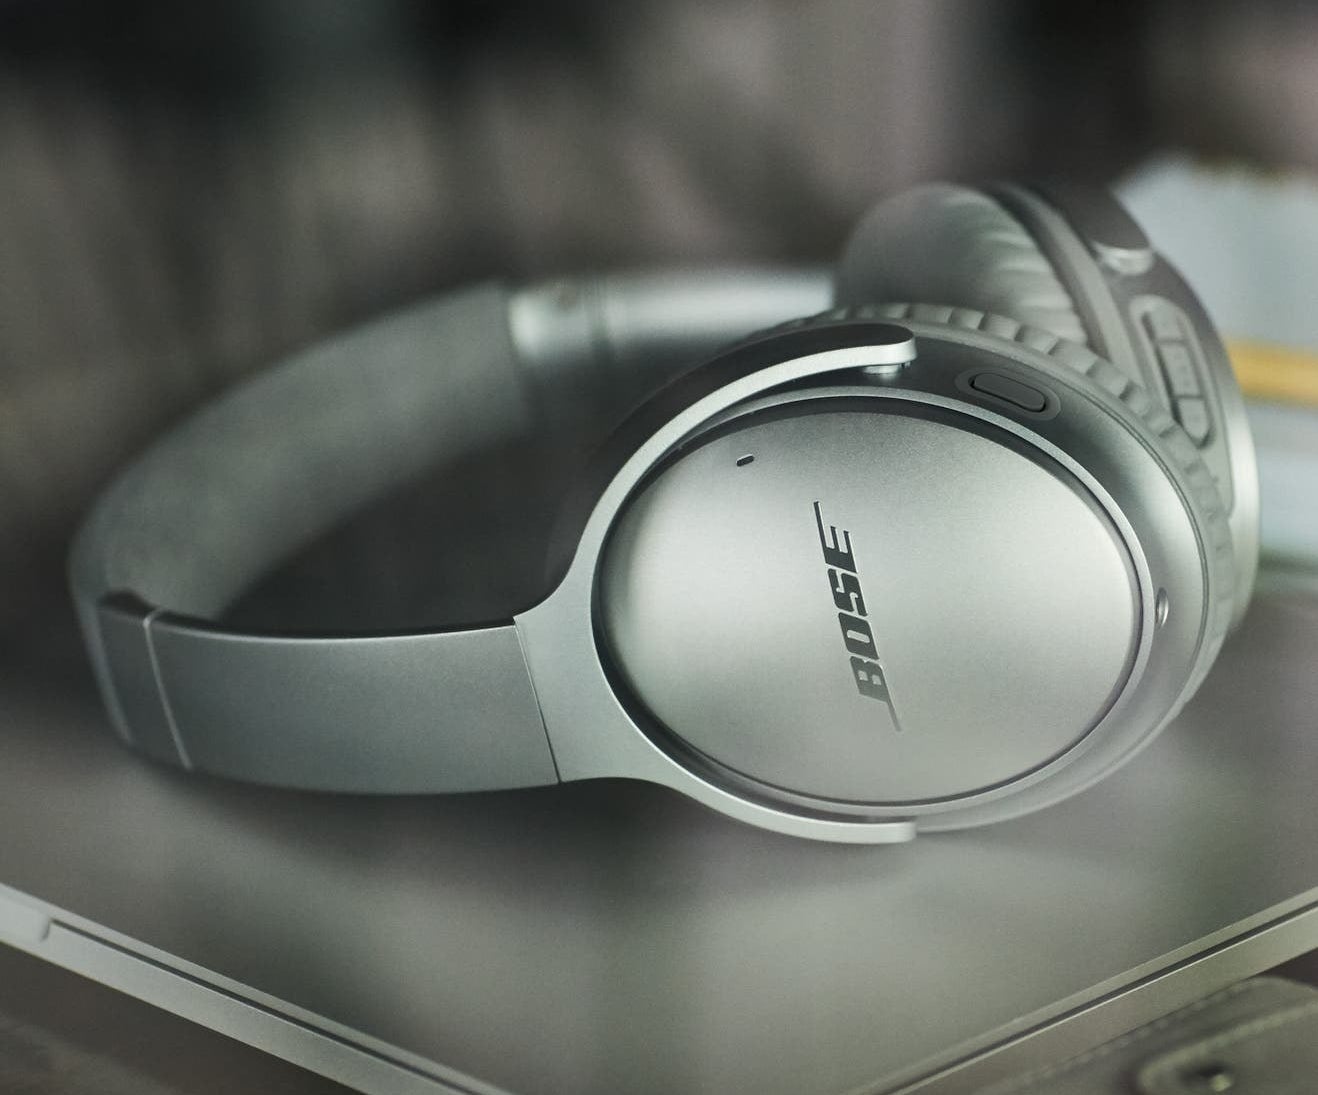 The headphones in silver